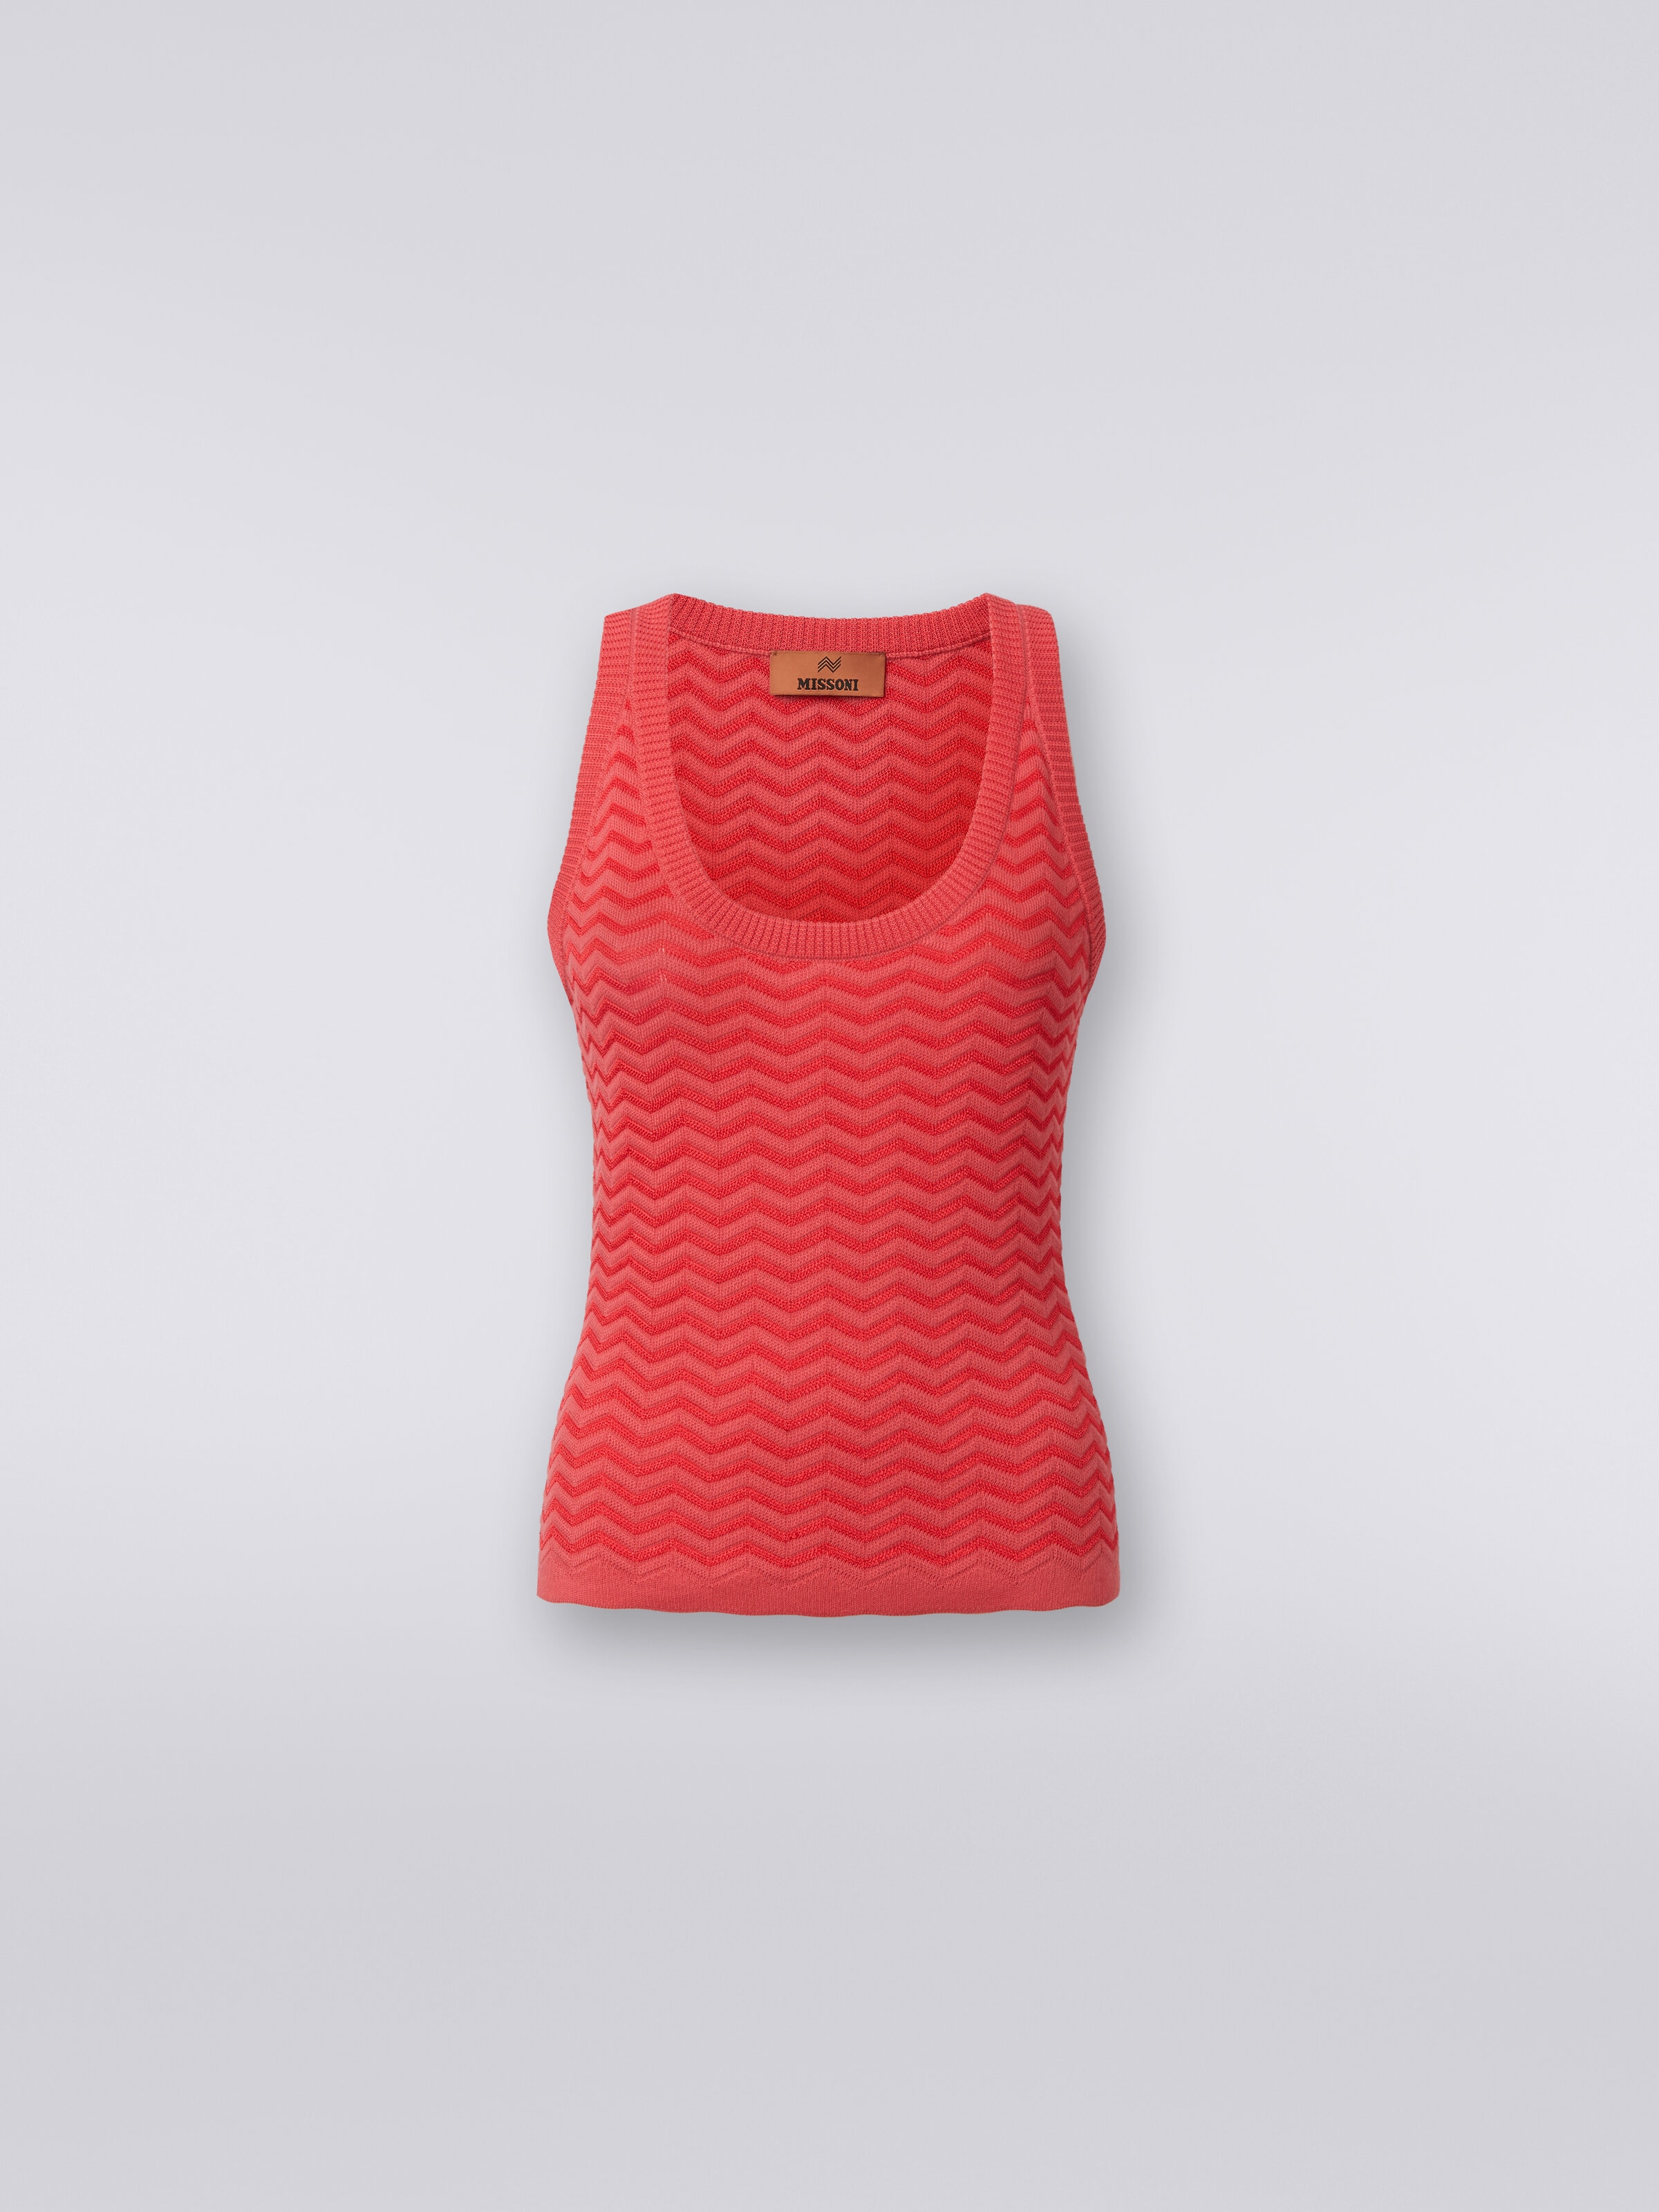 Tank top in chevron cotton and viscose knit, Red  - 0